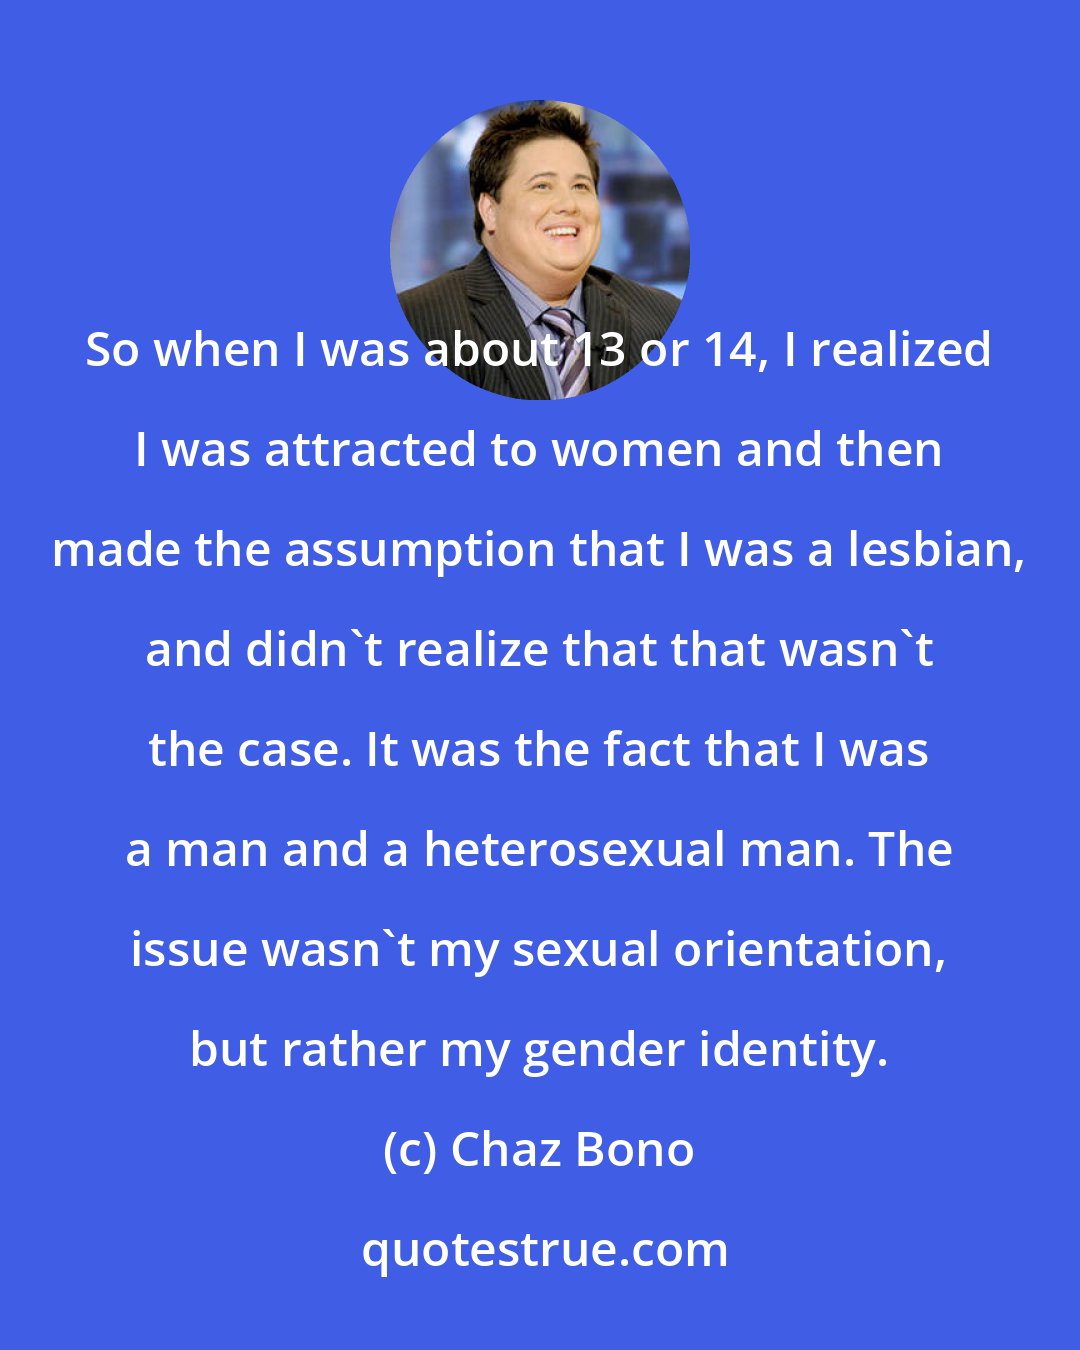 Chaz Bono: So when I was about 13 or 14, I realized I was attracted to women and then made the assumption that I was a lesbian, and didn't realize that that wasn't the case. It was the fact that I was a man and a heterosexual man. The issue wasn't my sexual orientation, but rather my gender identity.